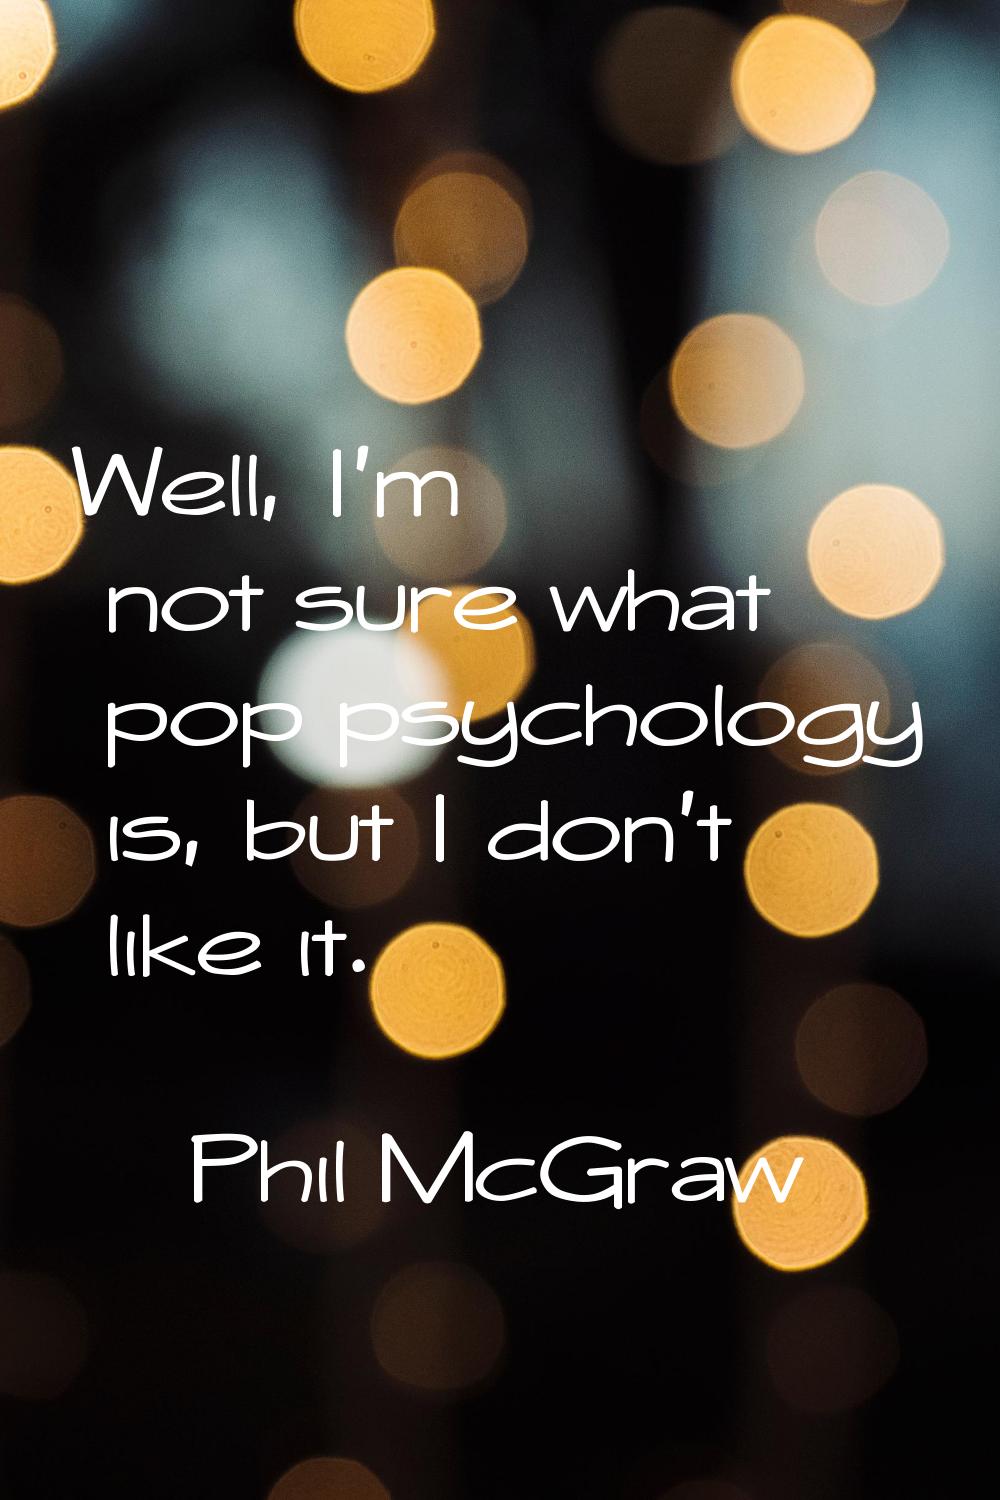 Well, I'm not sure what pop psychology is, but I don't like it.